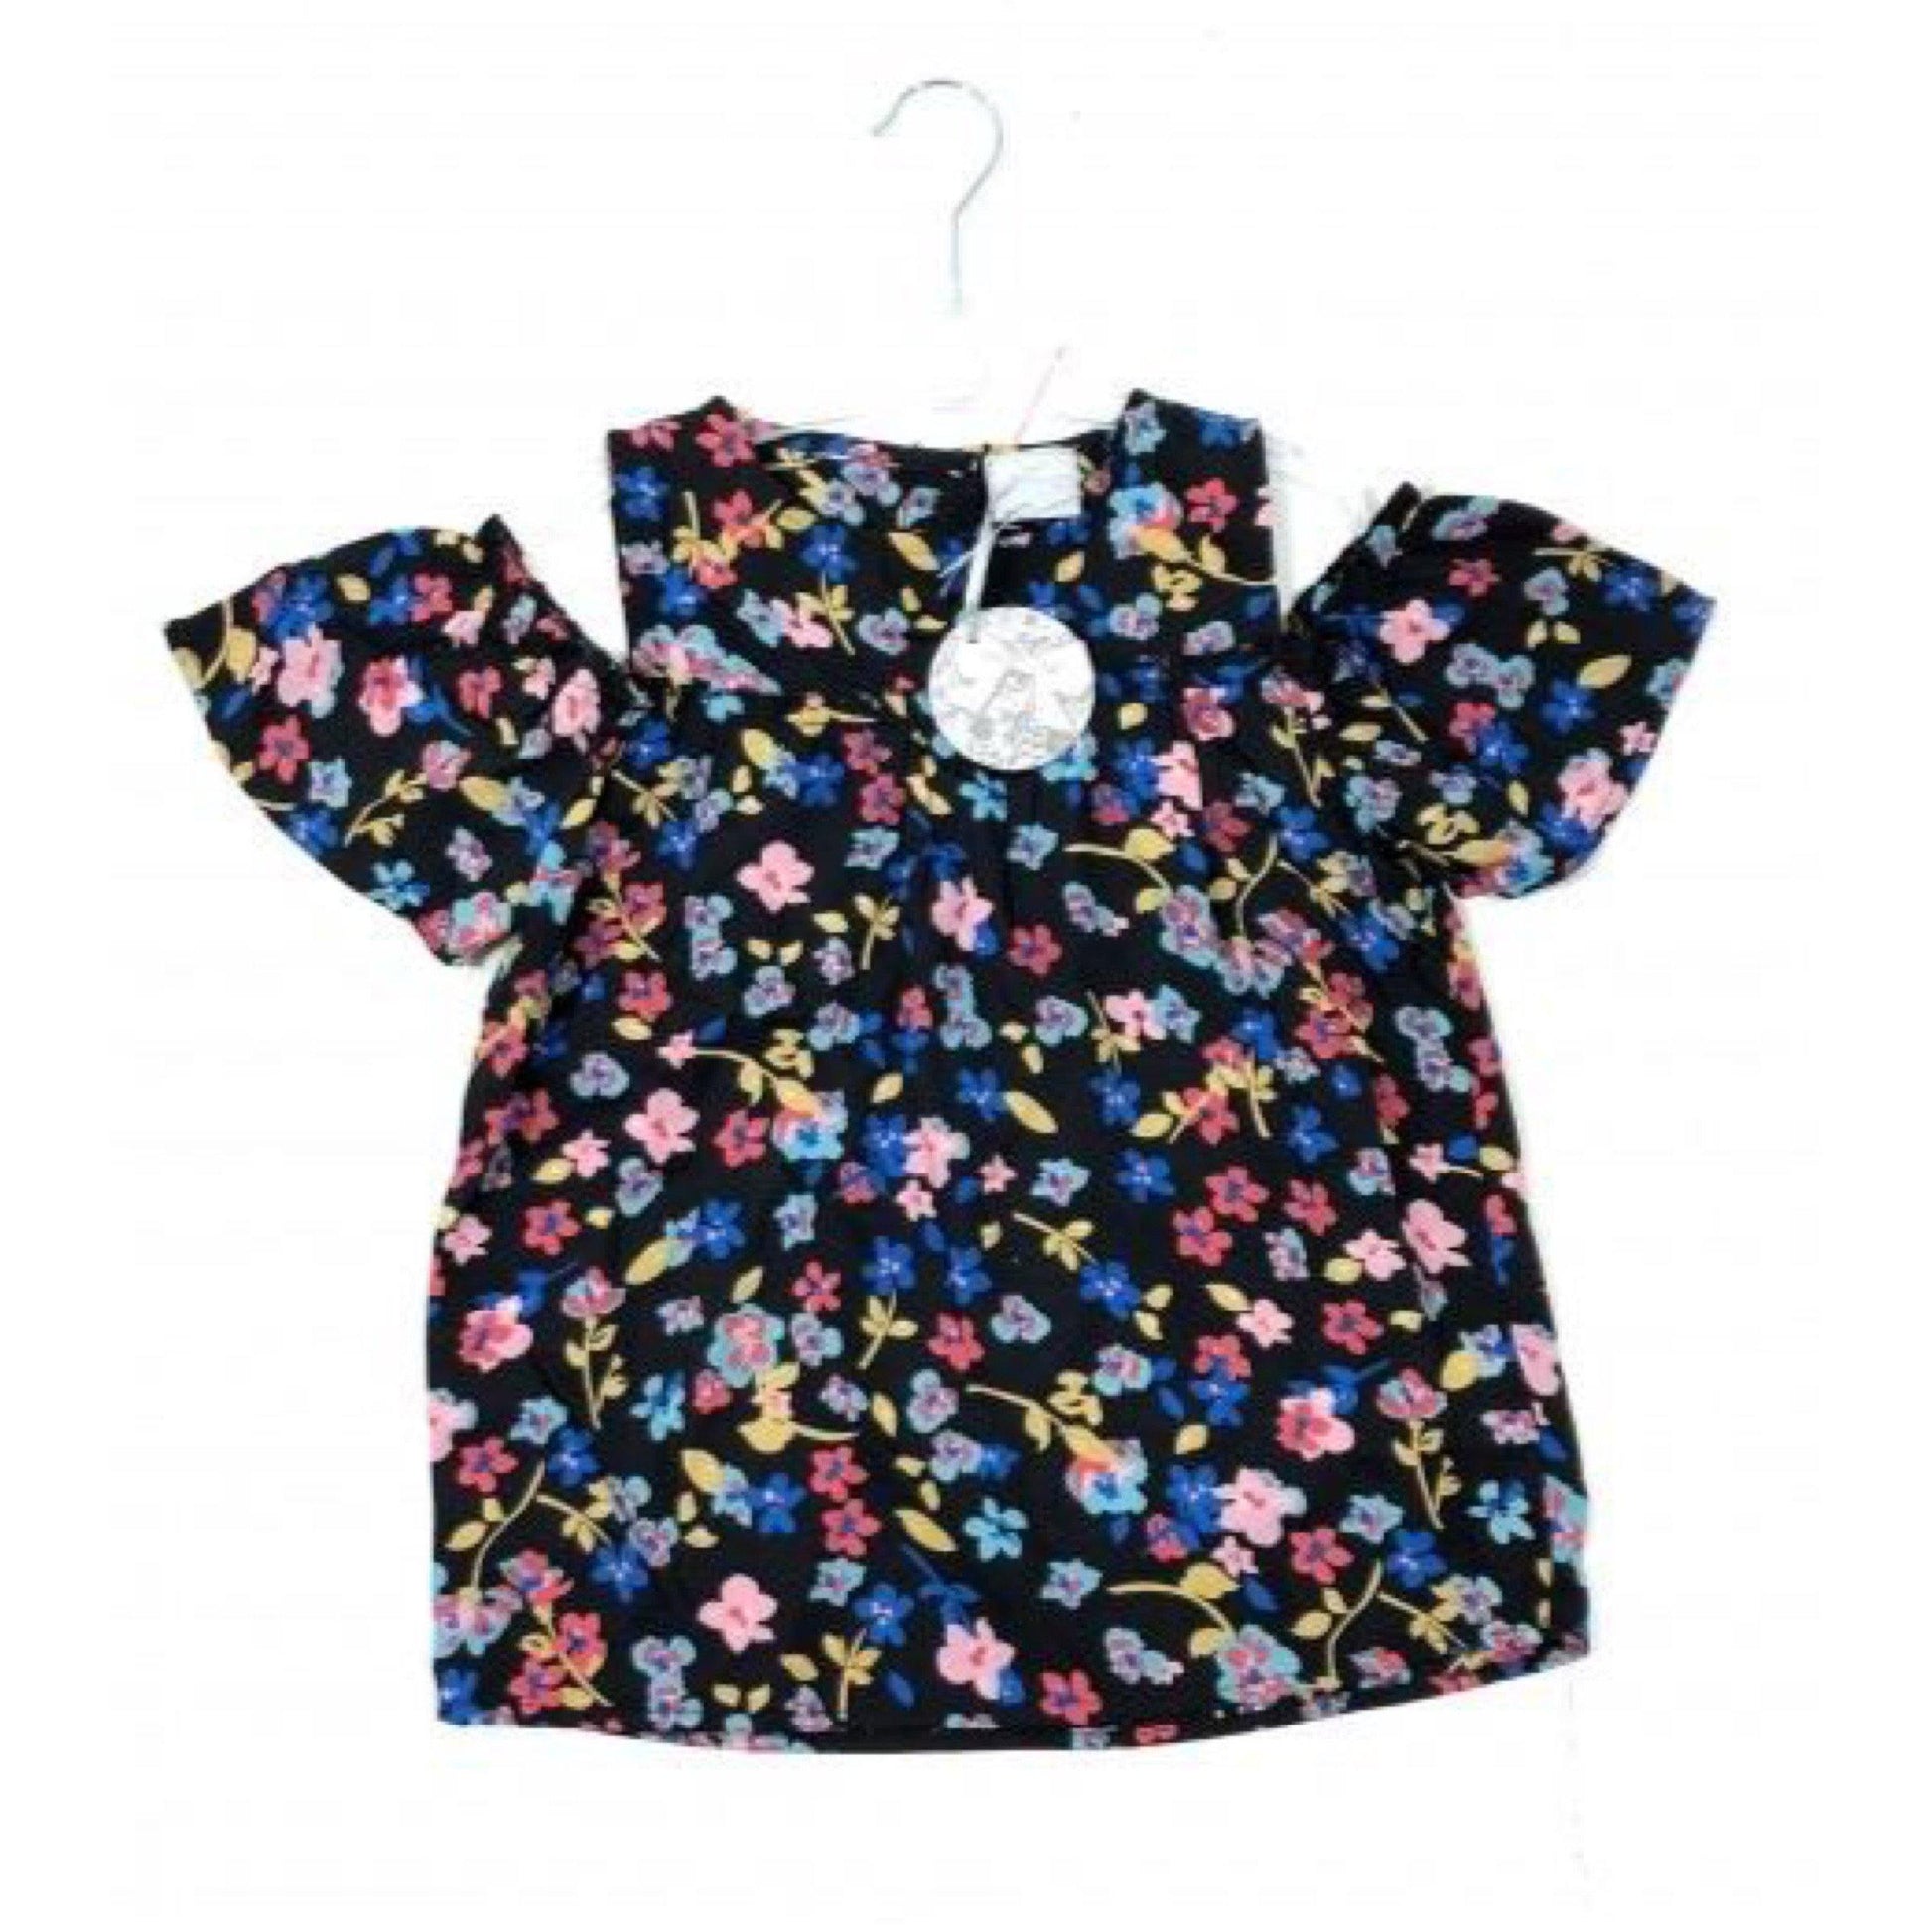 Girls Floral Cold Shoulder Top | Oscar & Me | Baby & Children’s Clothing & Accessories